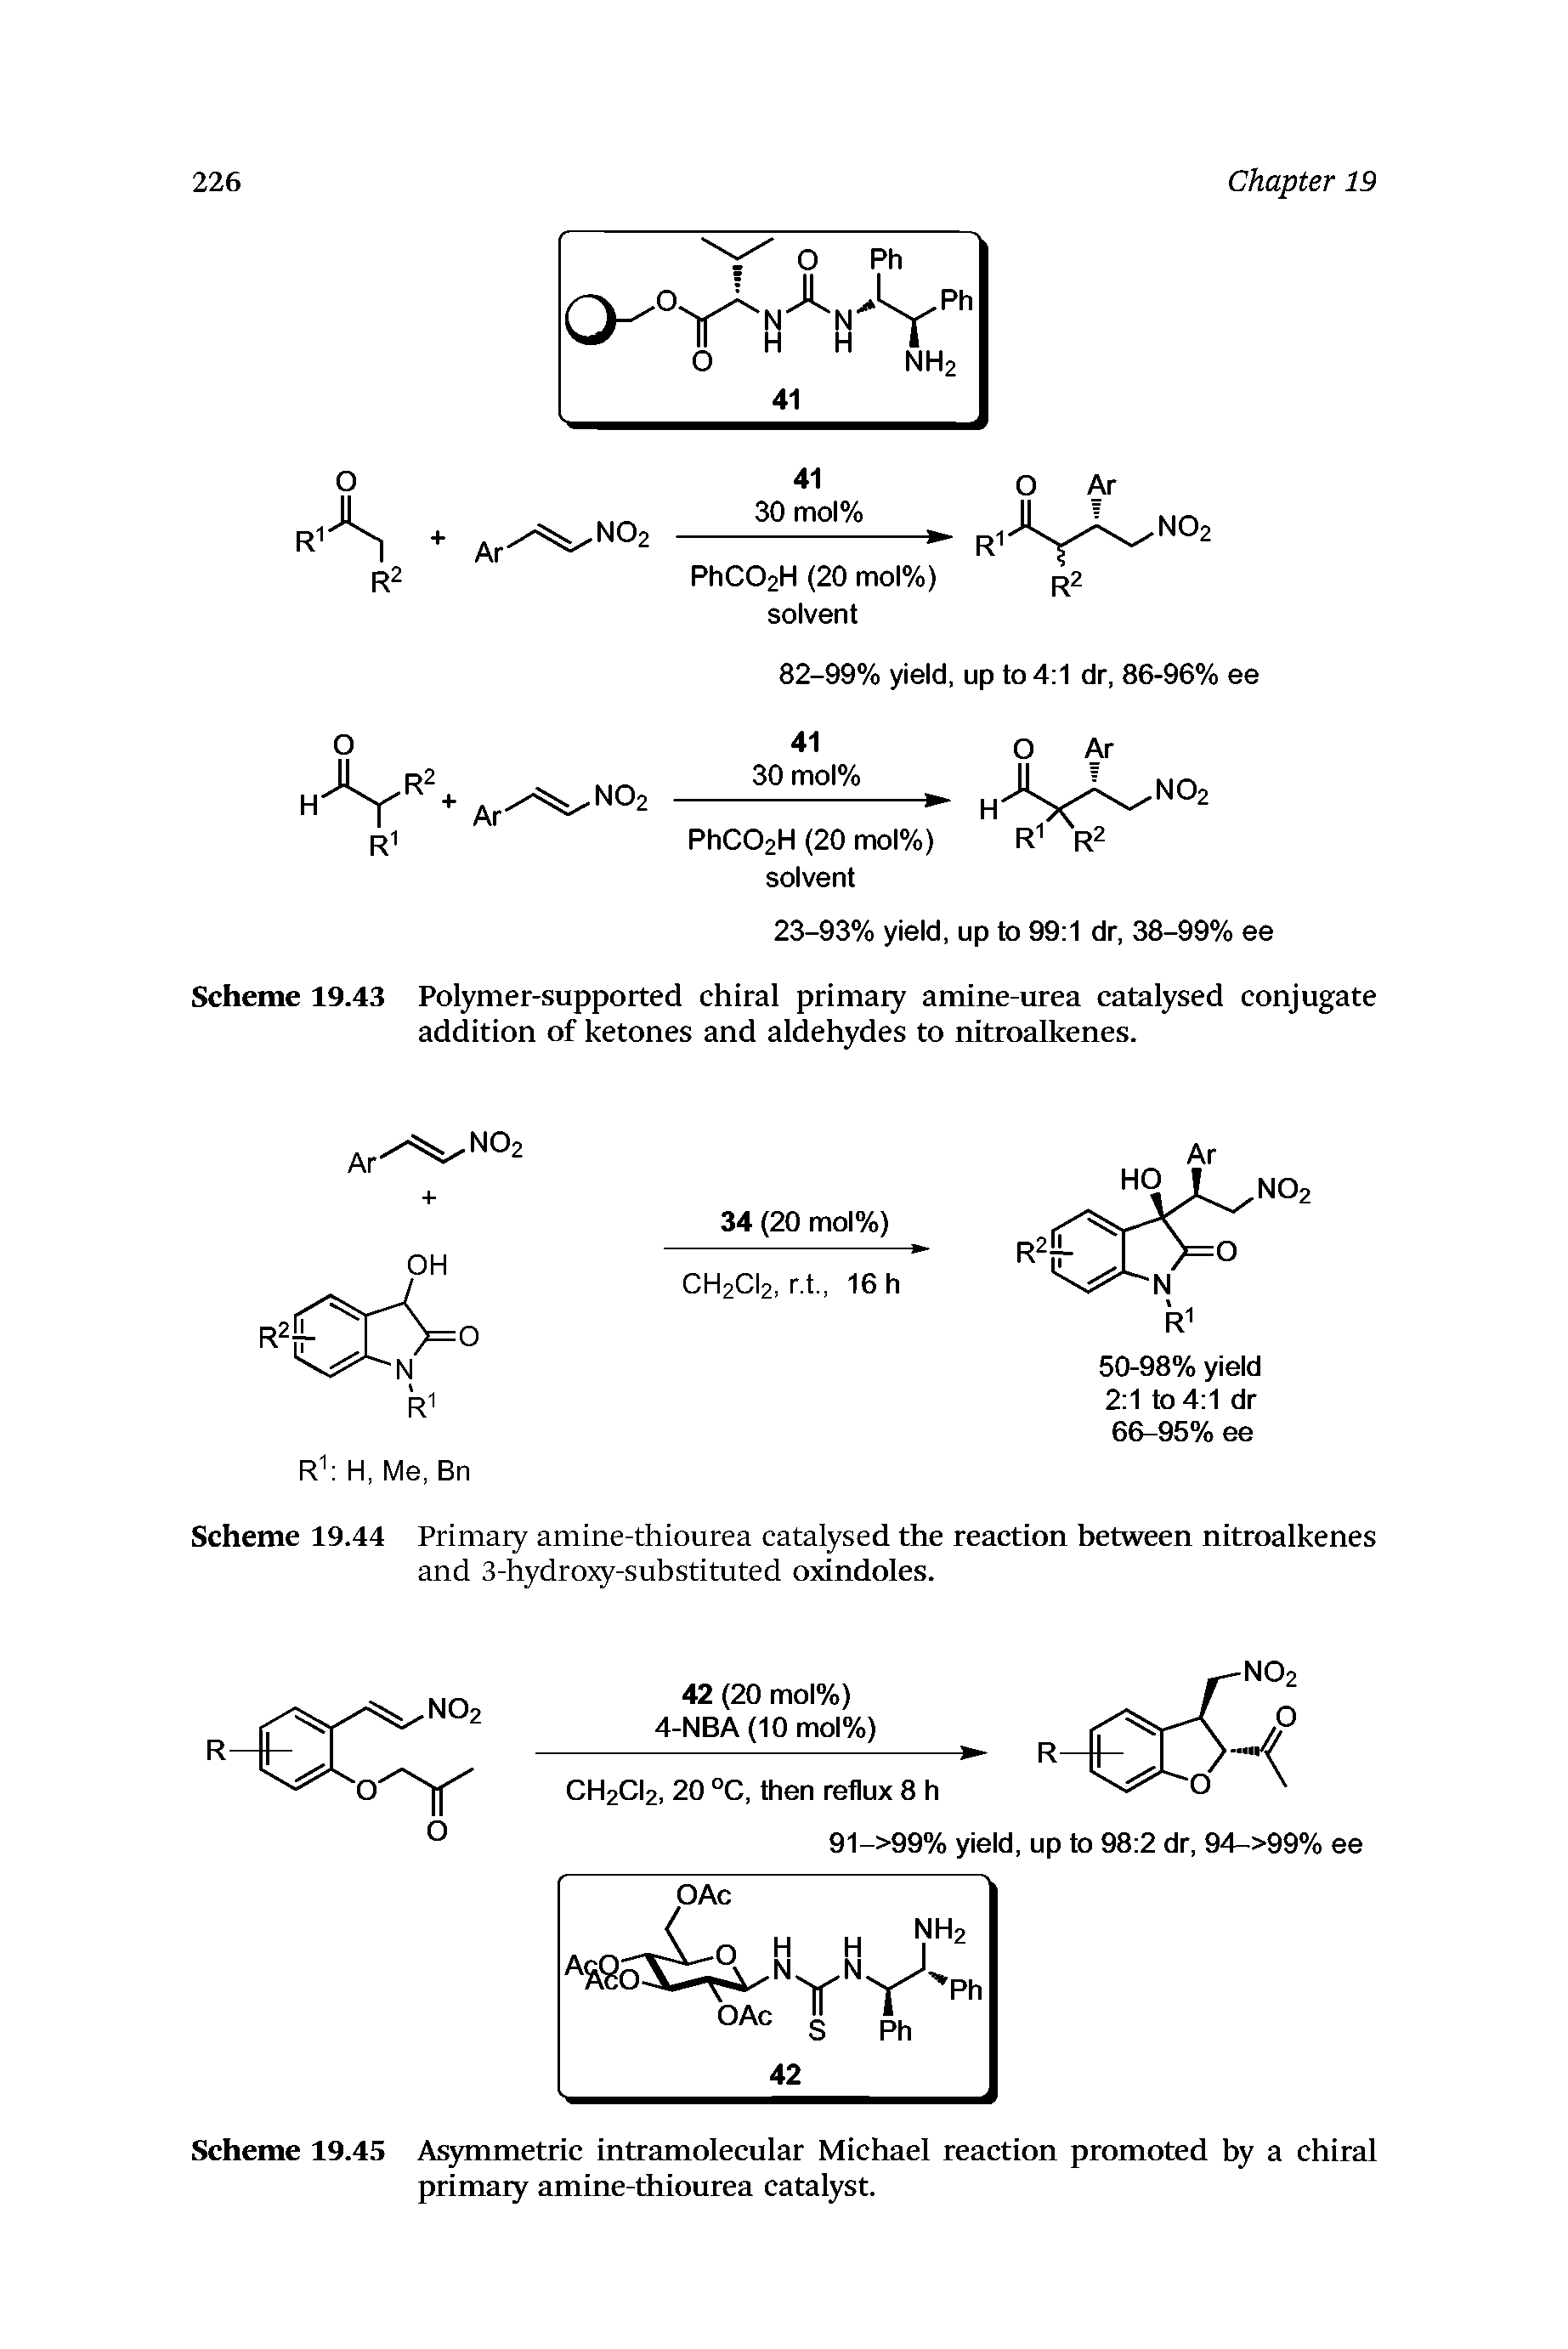 Scheme 19.44 Primary amine-thiourea catalysed the reaction between nitroalkenes and 3-hydro)g -substituted oxindoles.